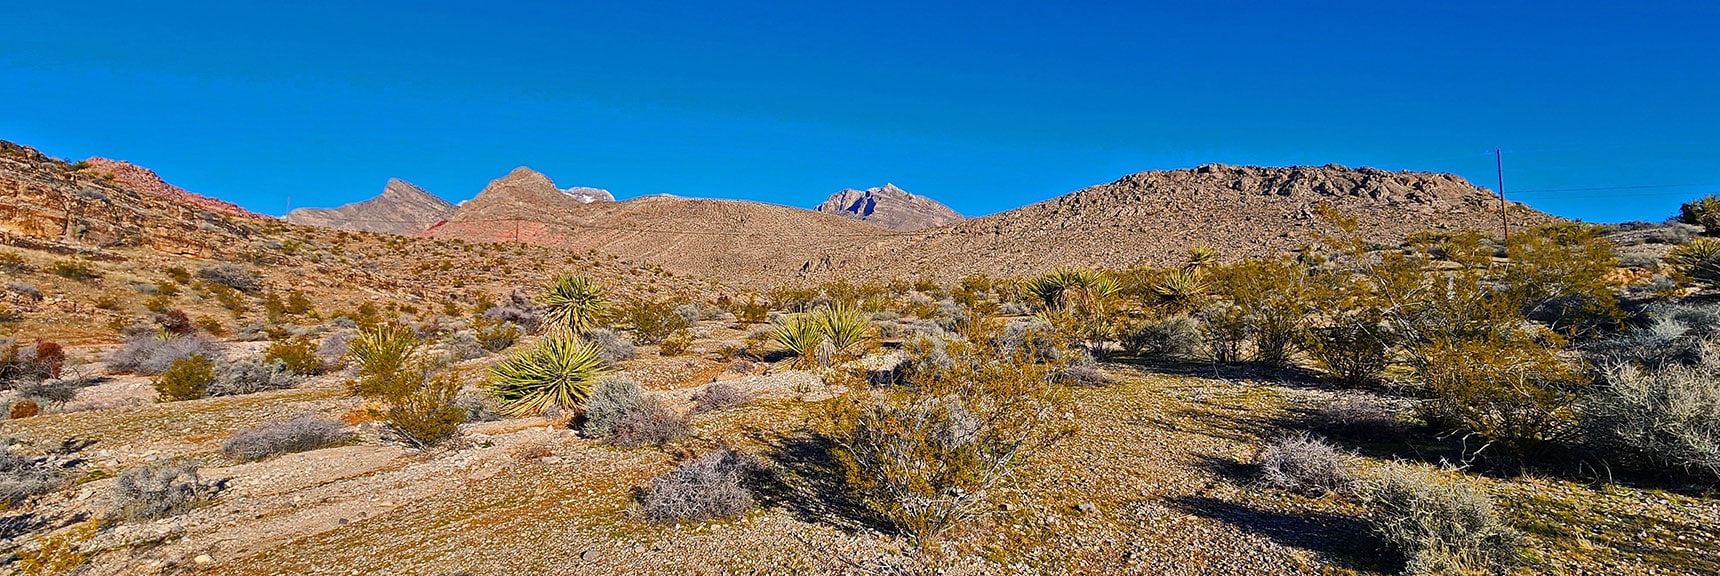 Gray Cap Ridge (left) Comes into View. Keep Right Around Hill to Right | Brownstone Trail | Calico Basin | Brownstone Basin | La Madre Mountains Wilderness, Nevada